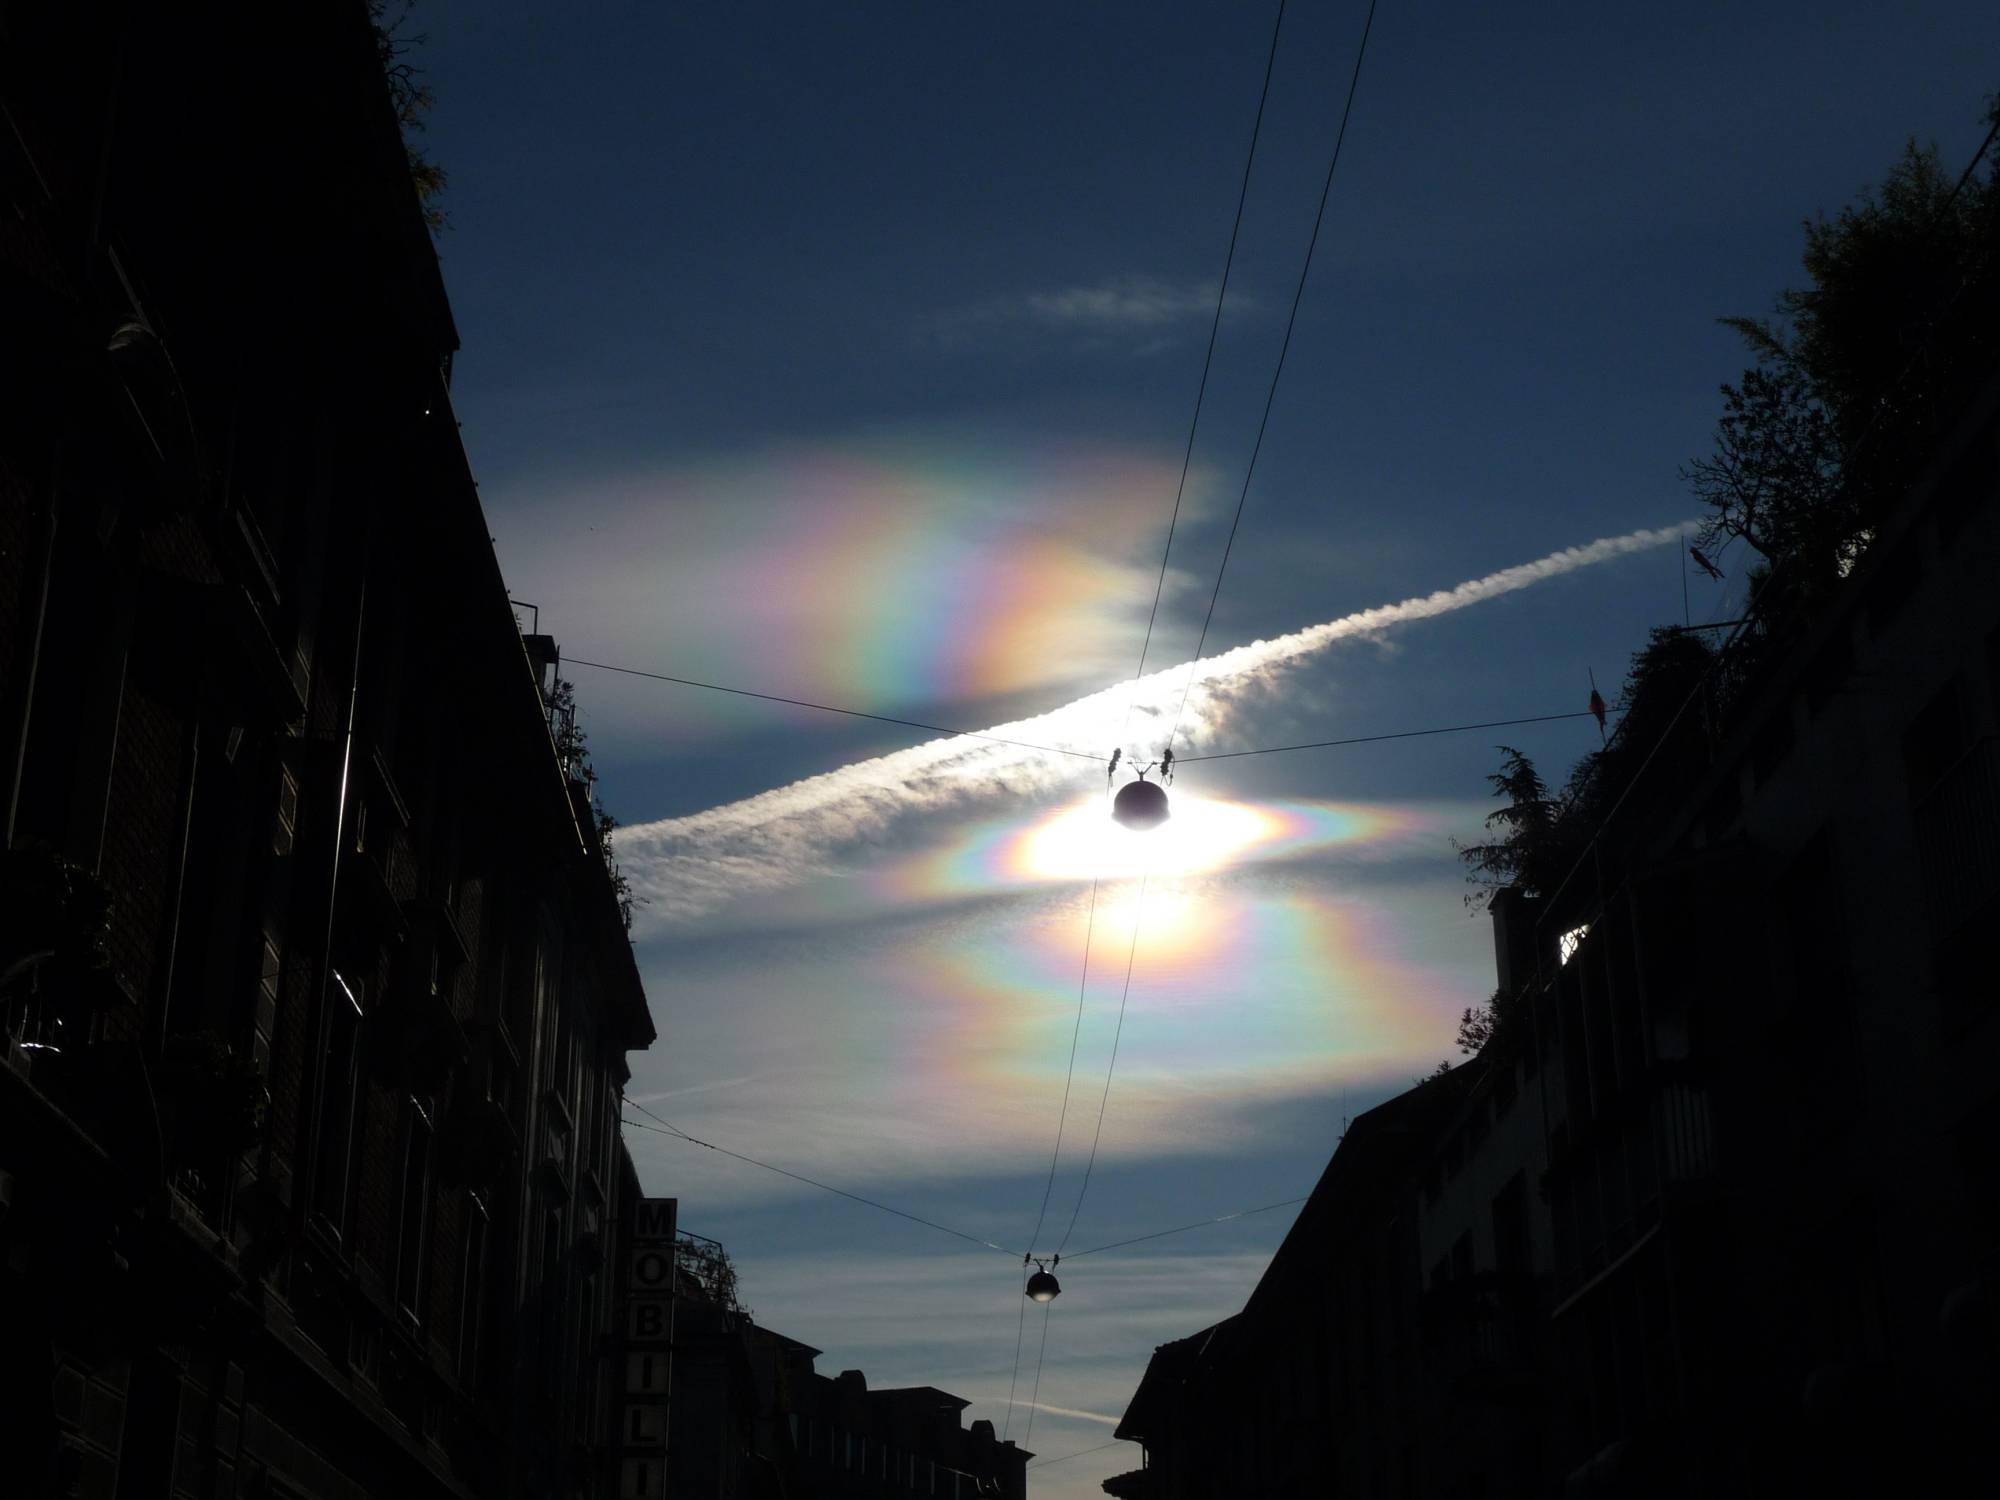 Nacreous clouds over Milan: 185 KB; click on the image to enlarge to 2000x1500 pixels